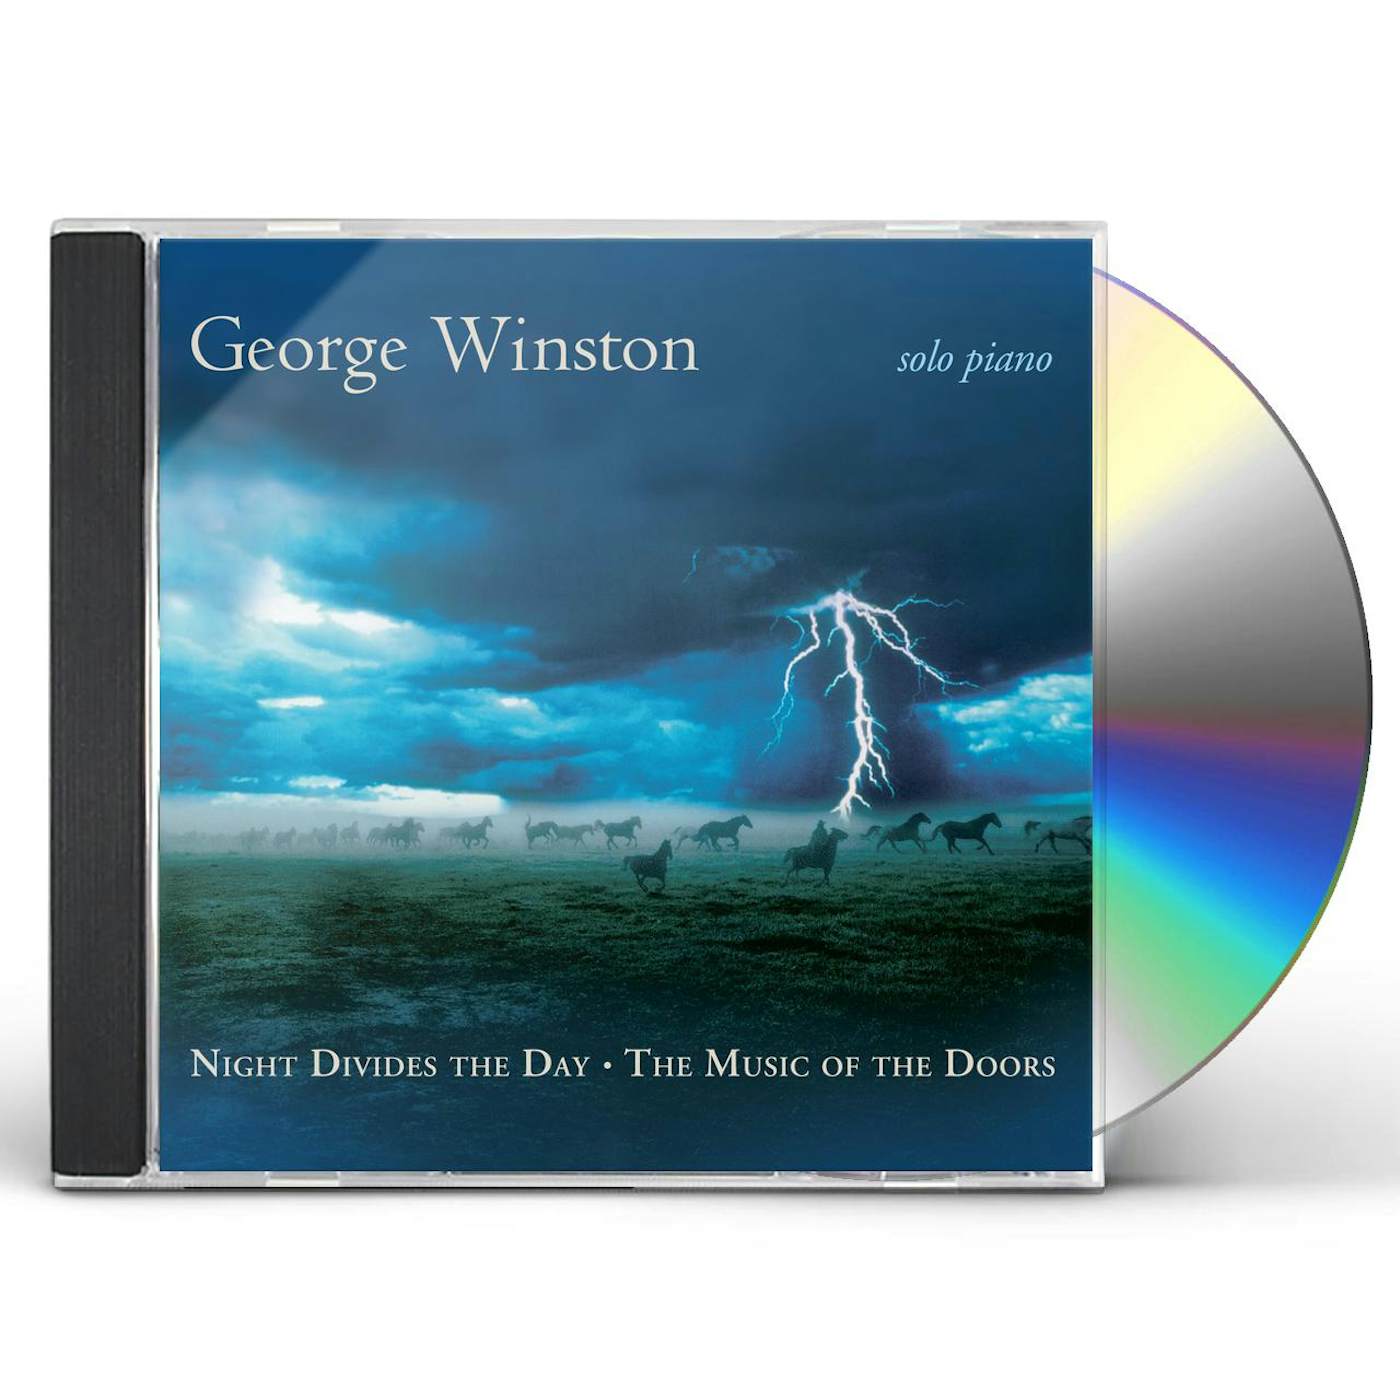 George Winston NIGHT DIVIDES THE DAY: THE MUSIC OF THE DOORS CD